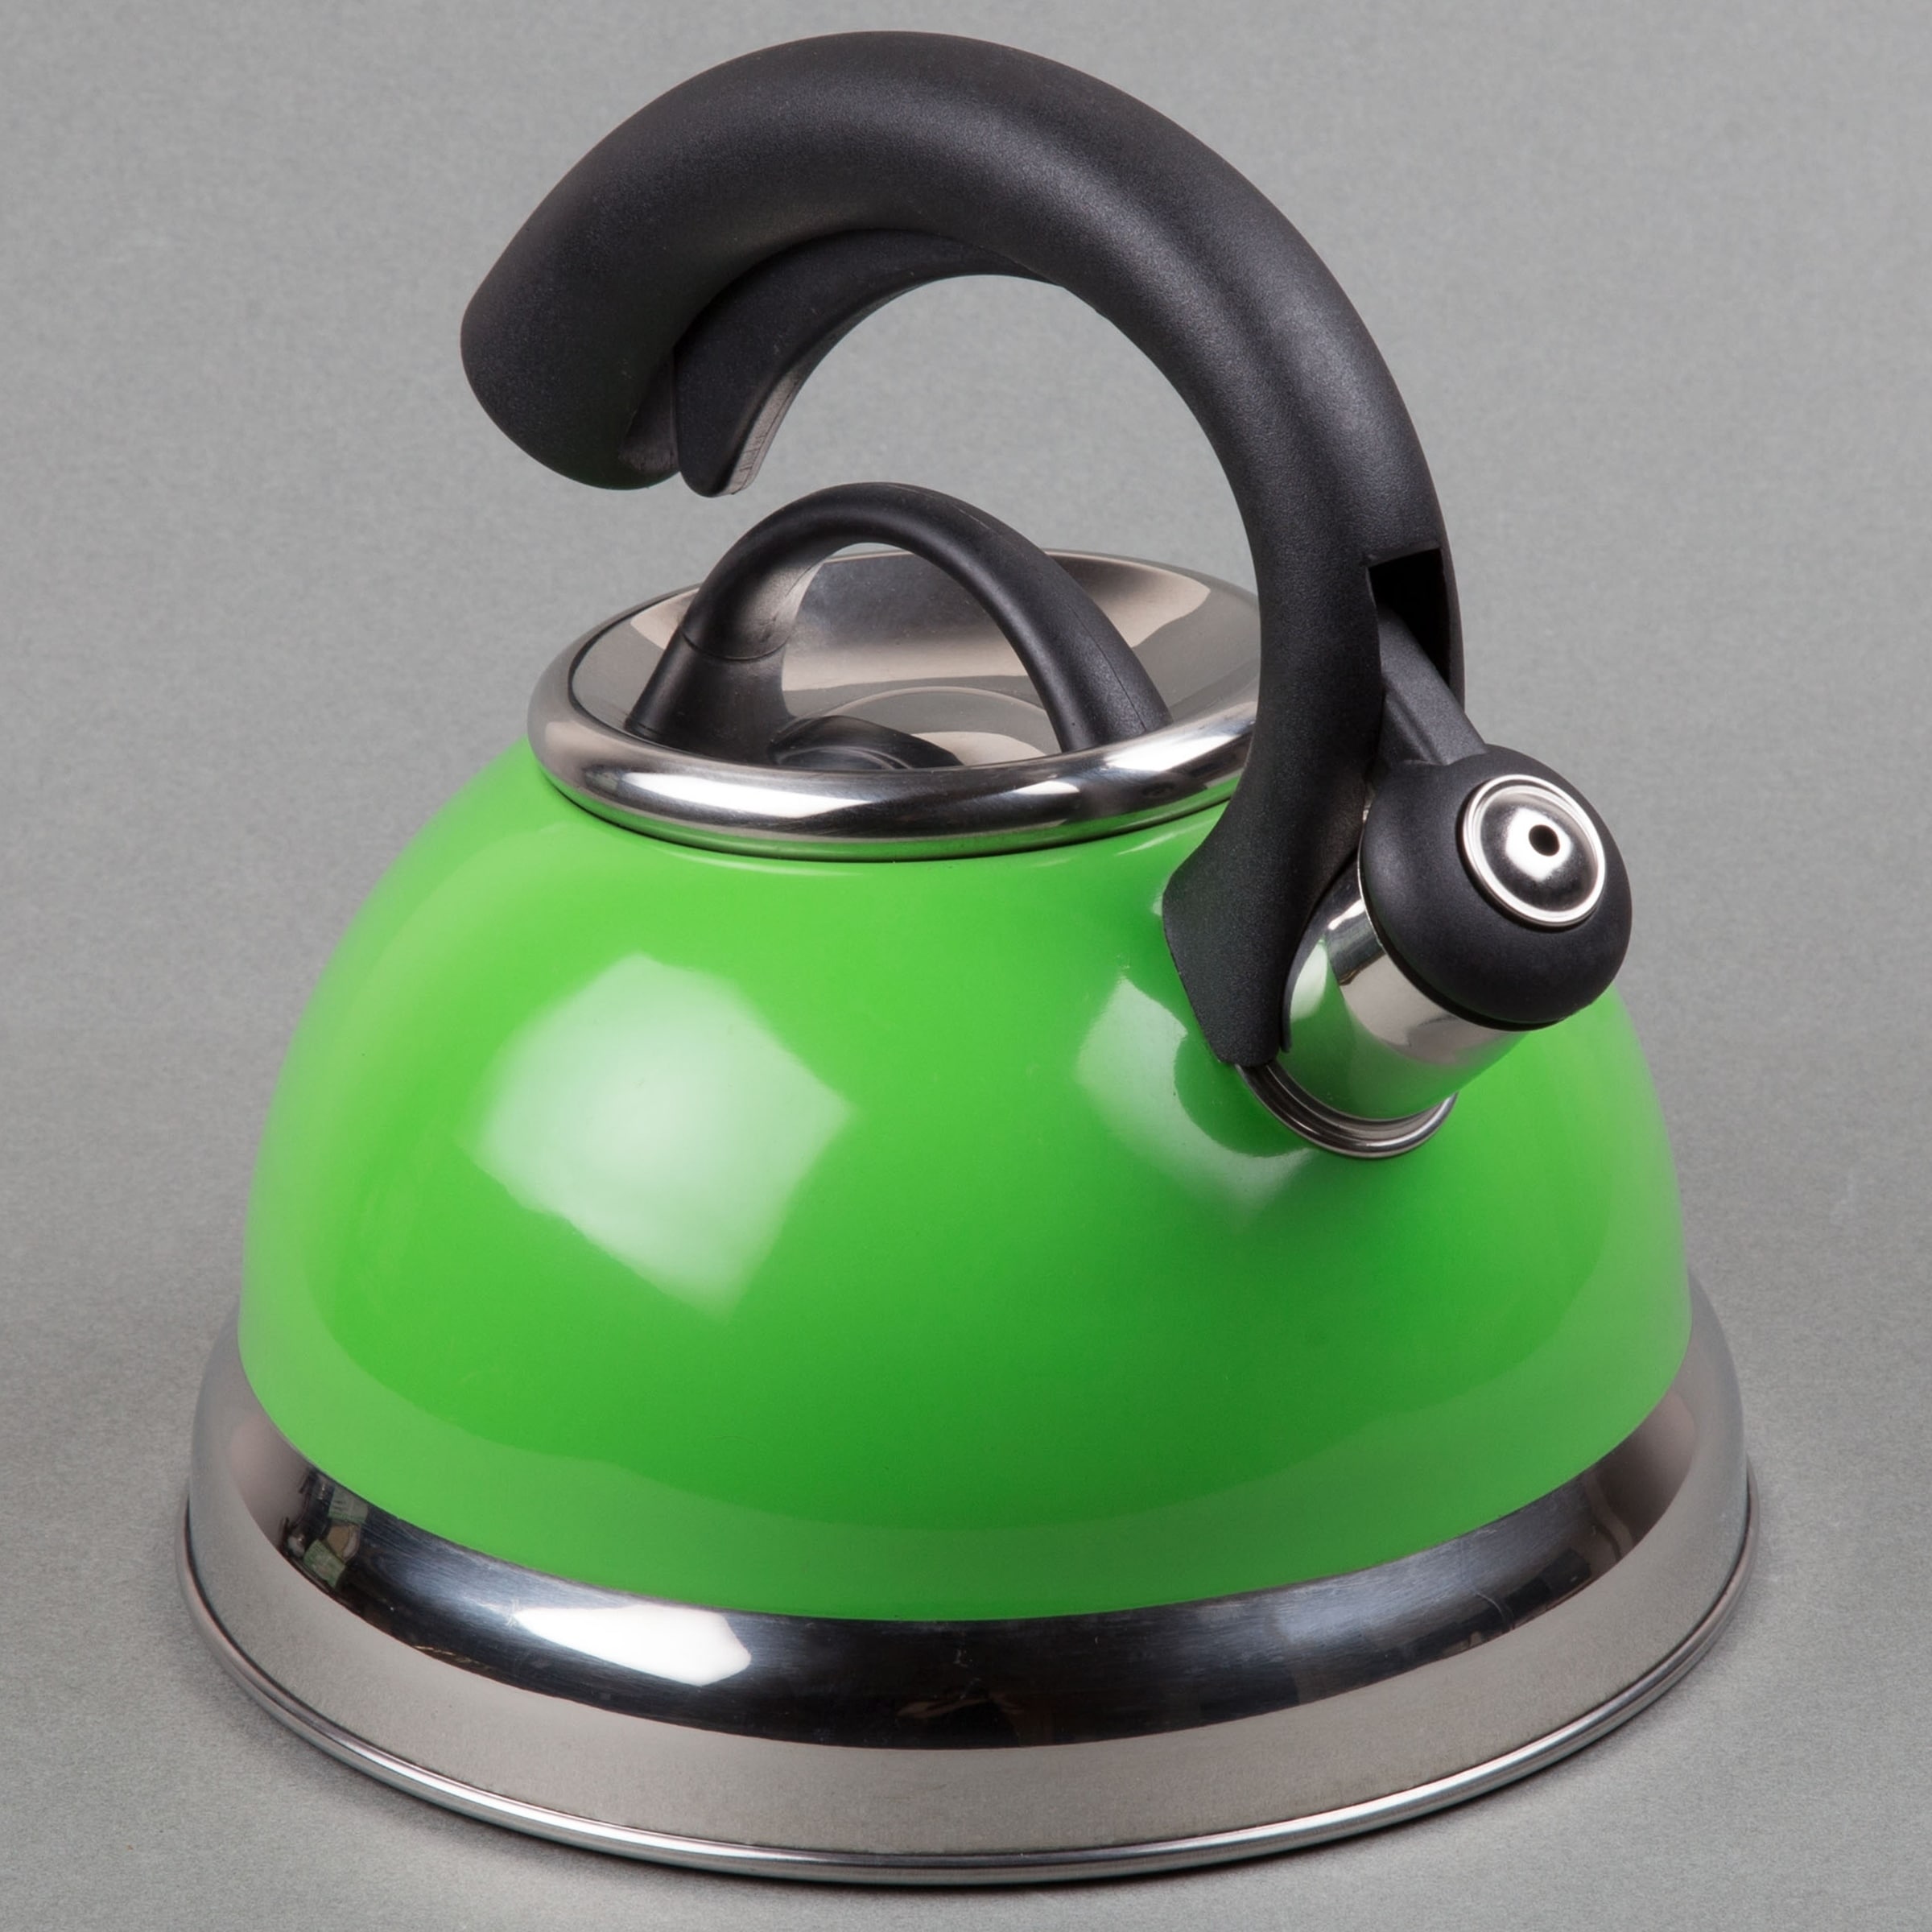 https://ak1.ostkcdn.com/images/products/10666399/Creative-Home-Symphony-2.6-Qt-Whistling-Stainless-Steel-Tea-Kettle-Green-1799a3bd-103a-4aca-a06e-4f211a0fe22e.jpg